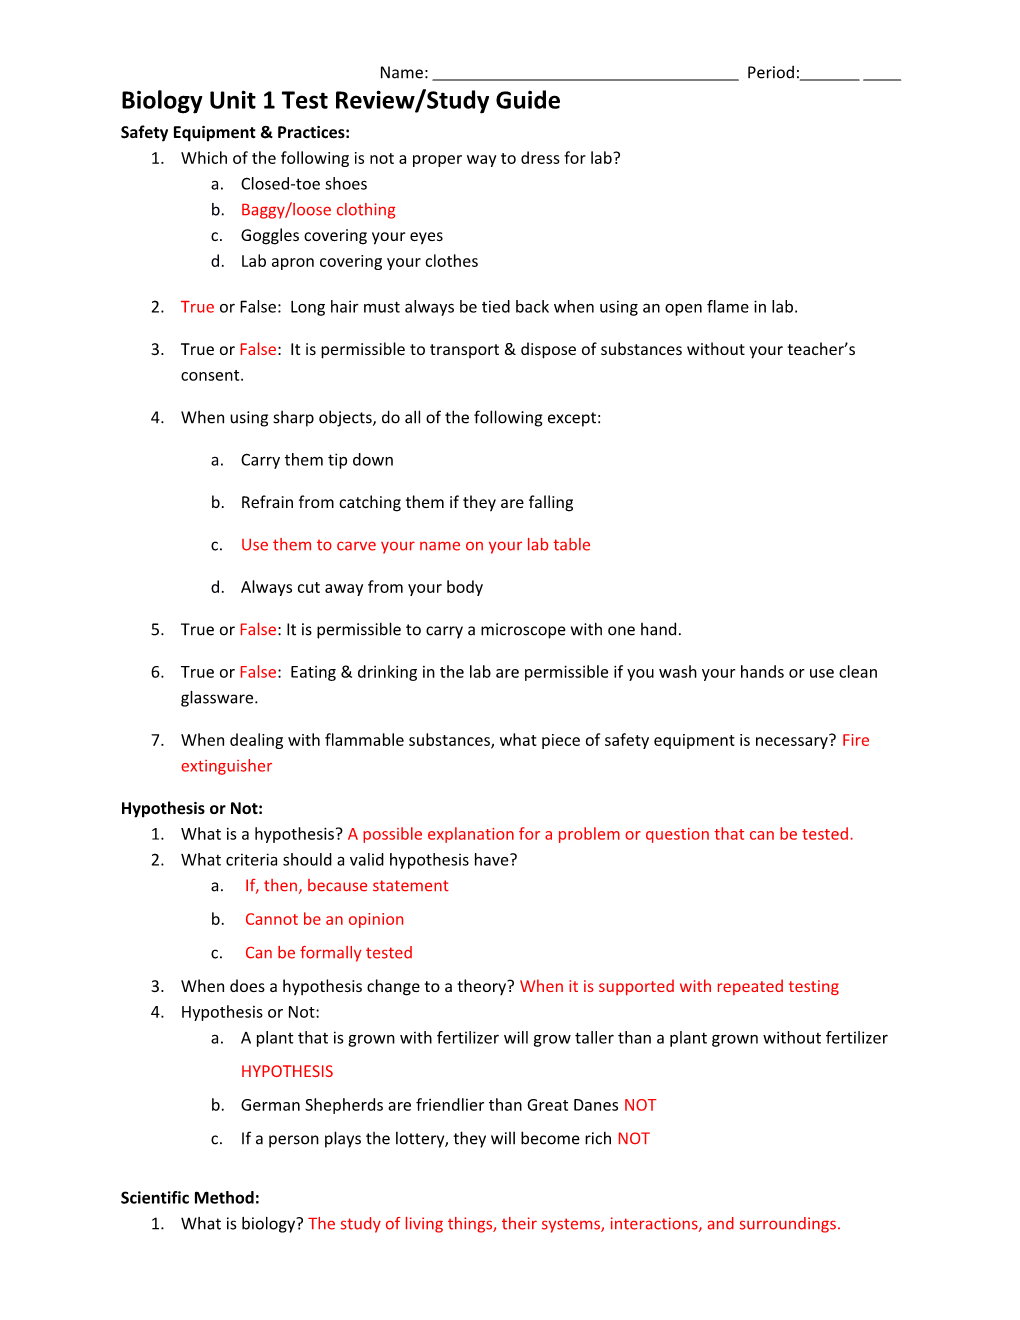 Biology Unit 1 Test Review/Study Guide